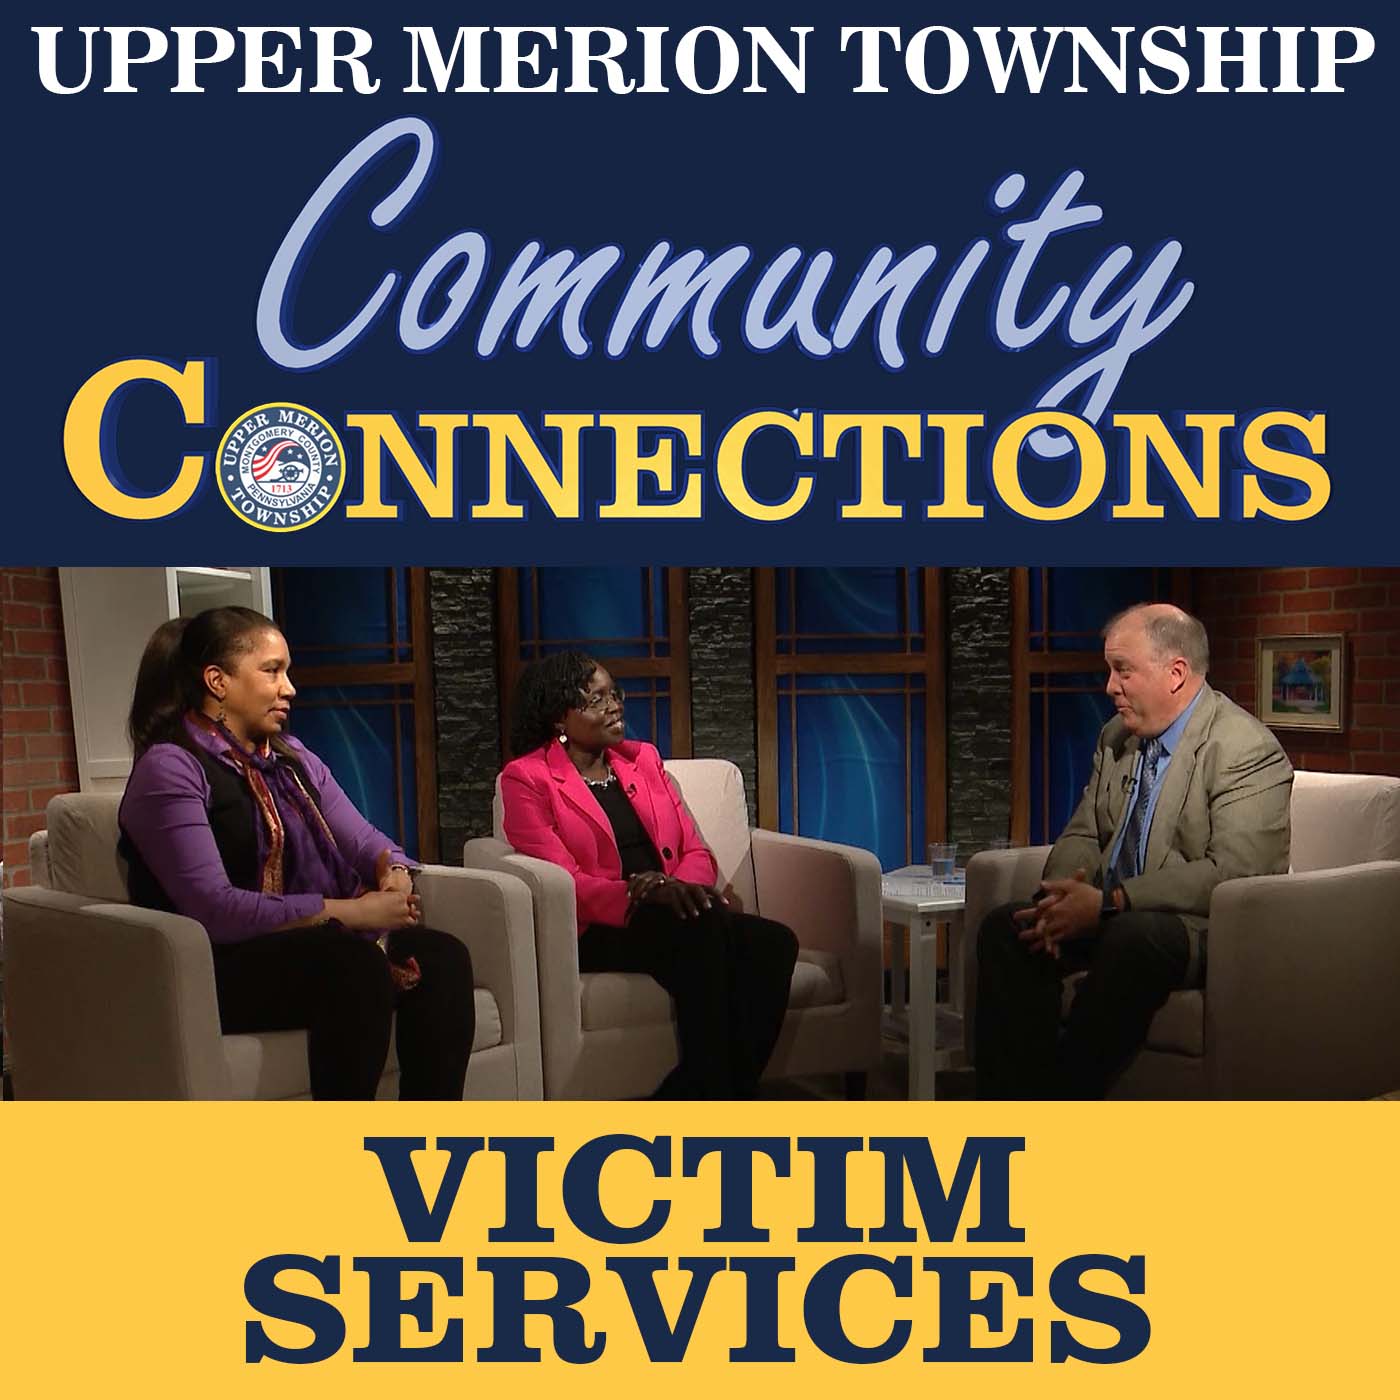 Victim Services Center of Montgomery County